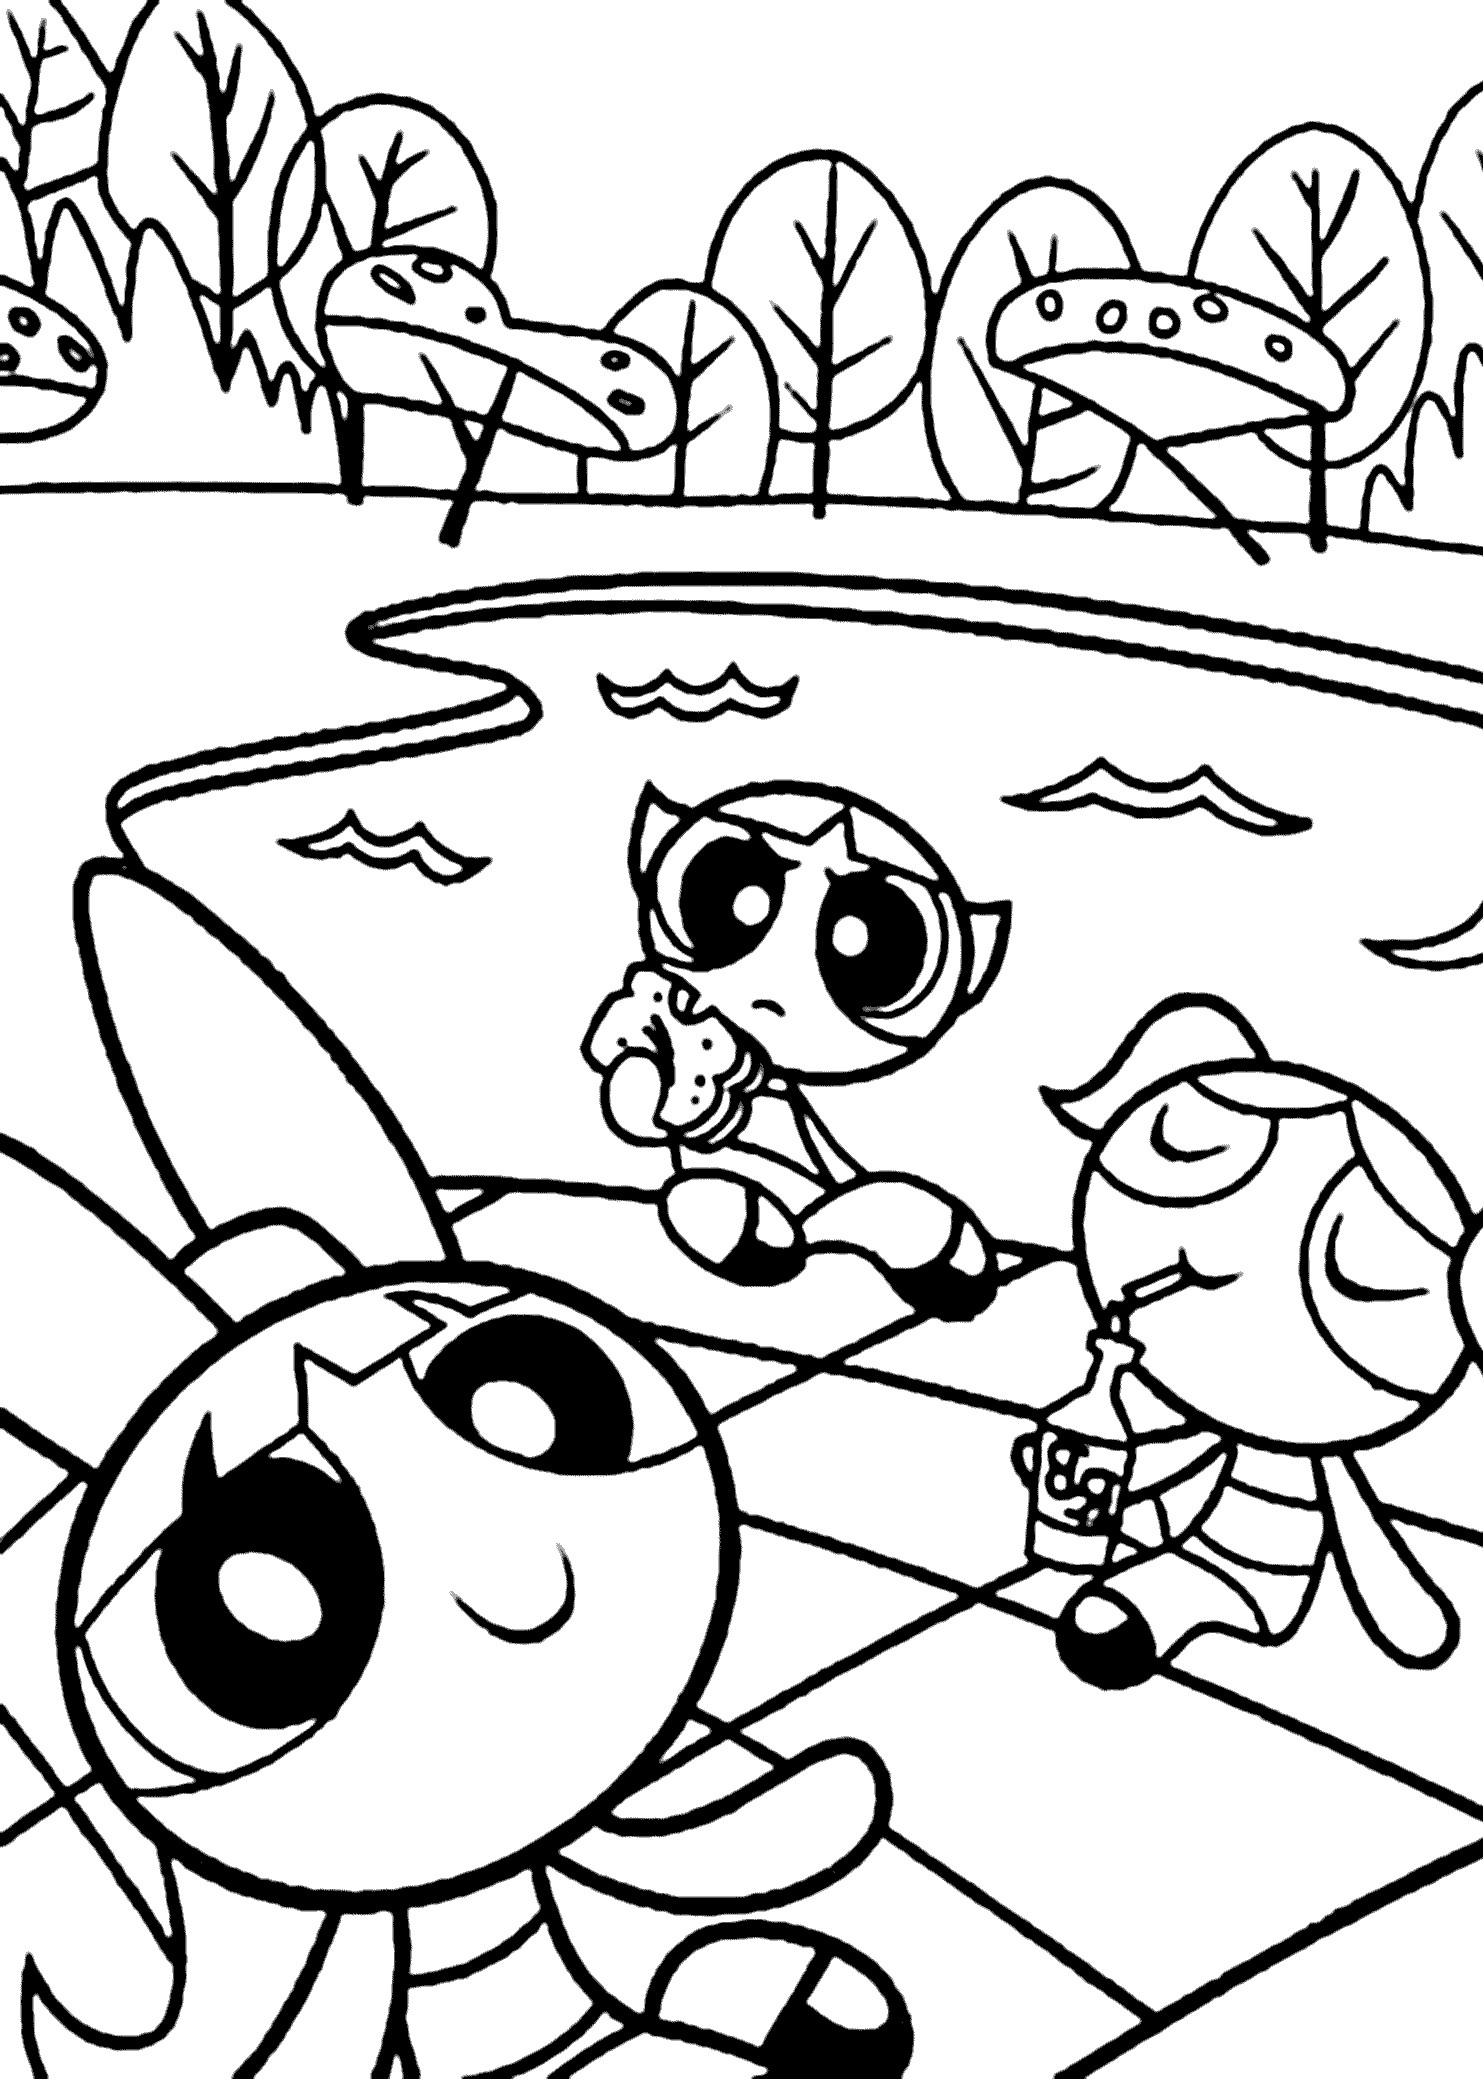 Powerpuff Girls Coloring Pages
 Power Puff Girls Z Coloring Pages Coloring Home